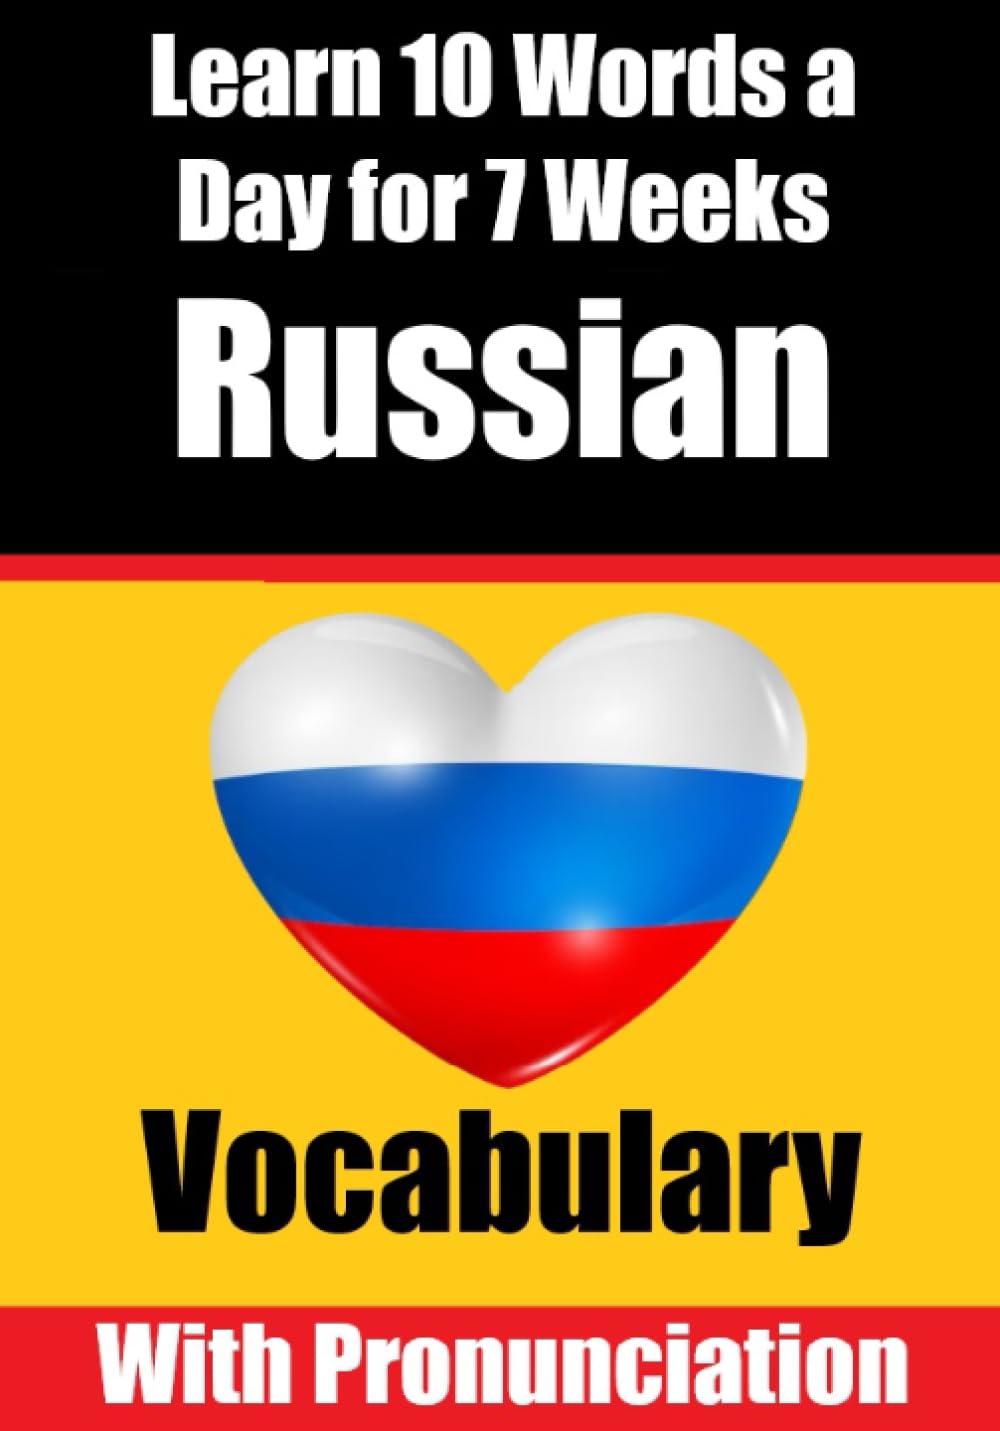 Learn 10 Russian Words a Day for 7 Weeks